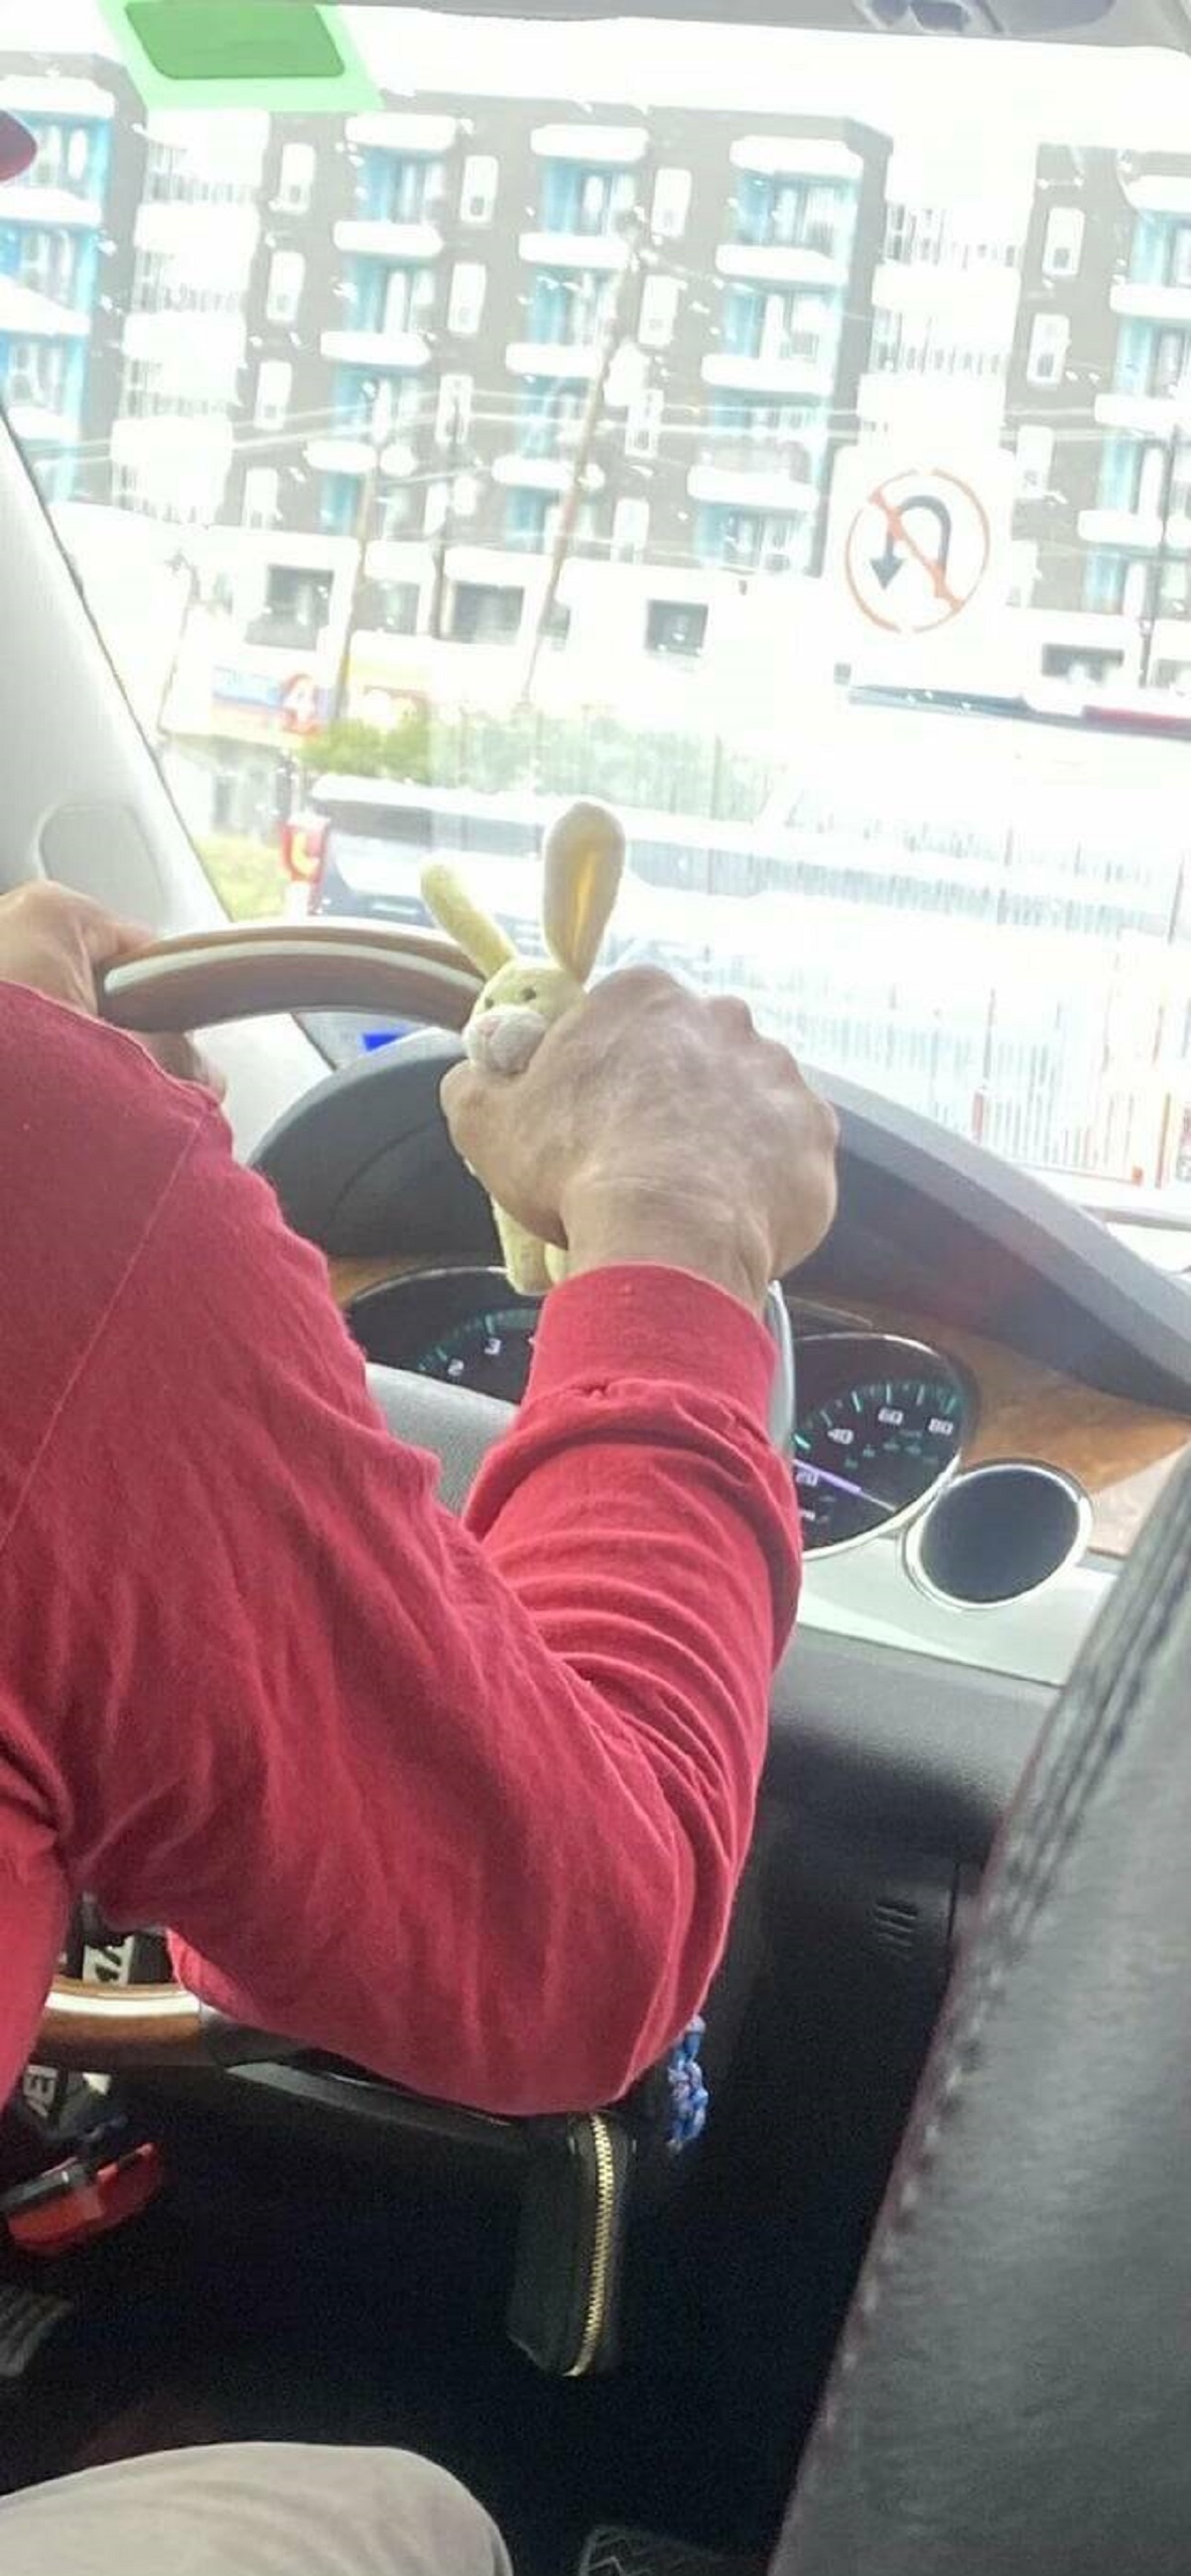 "My Lyft driver holds a stuffed bunny while driving."